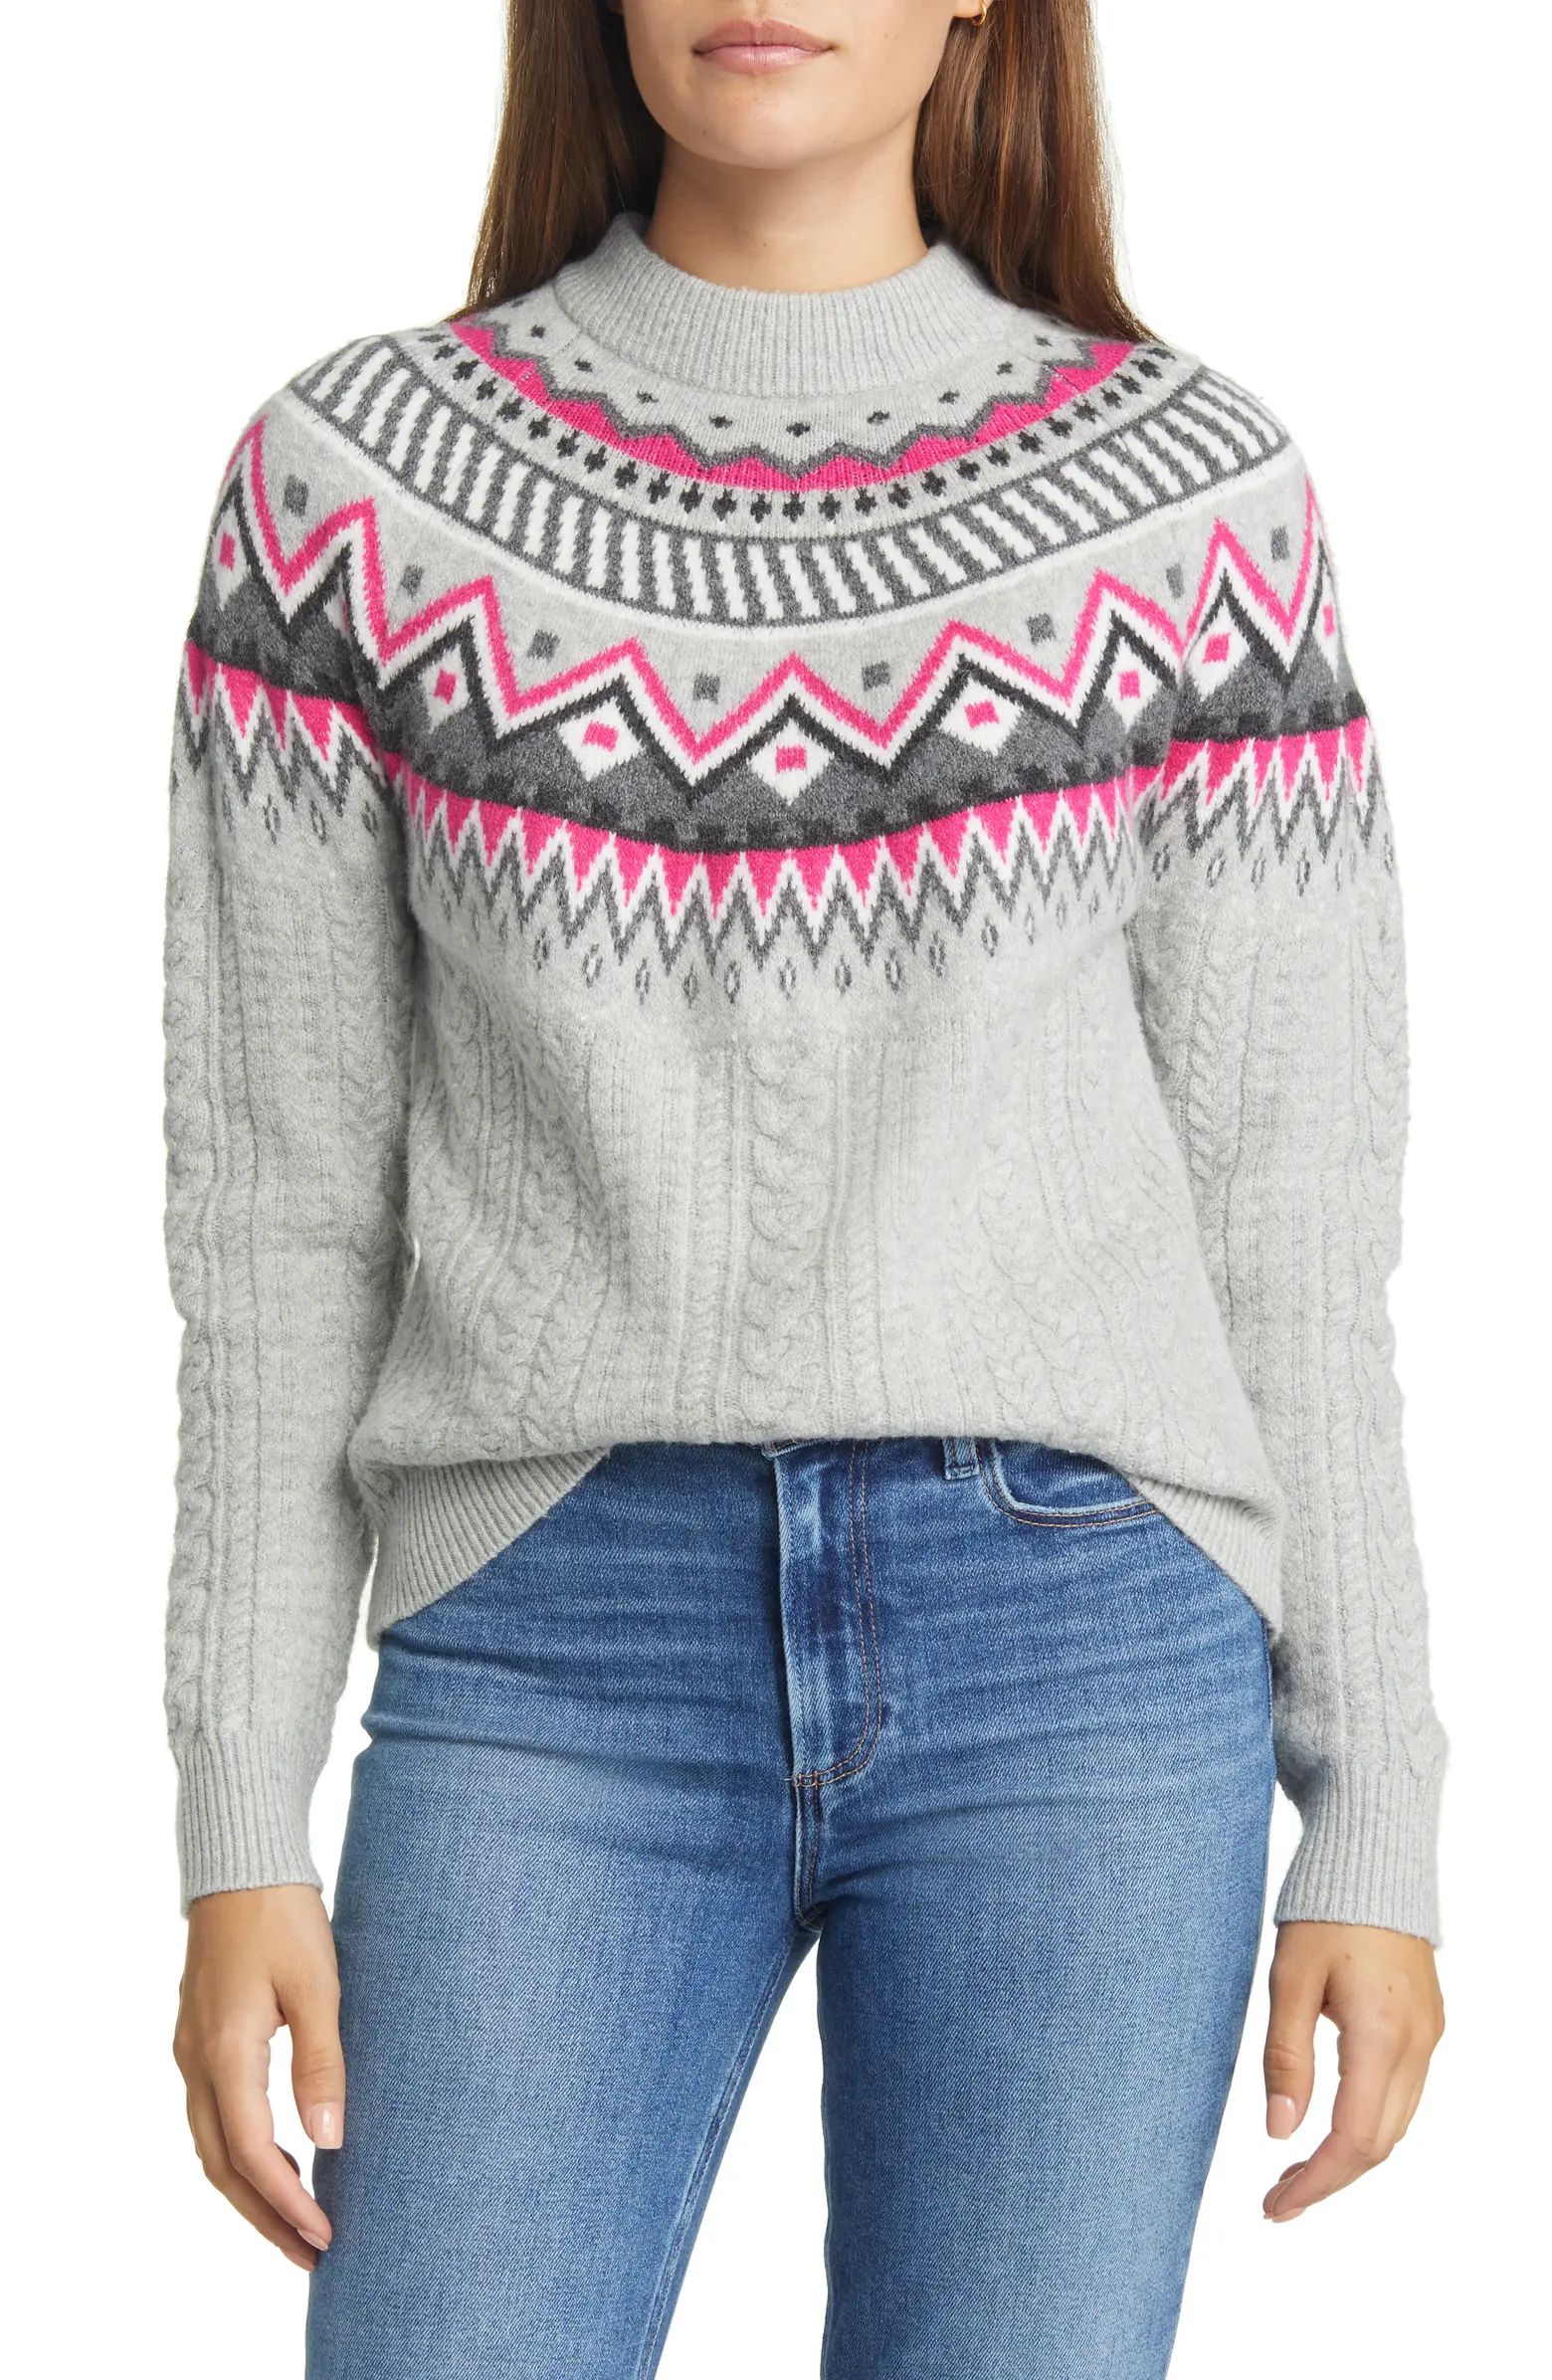 Fair Isle Cable Knit Sweater | Nordstrom